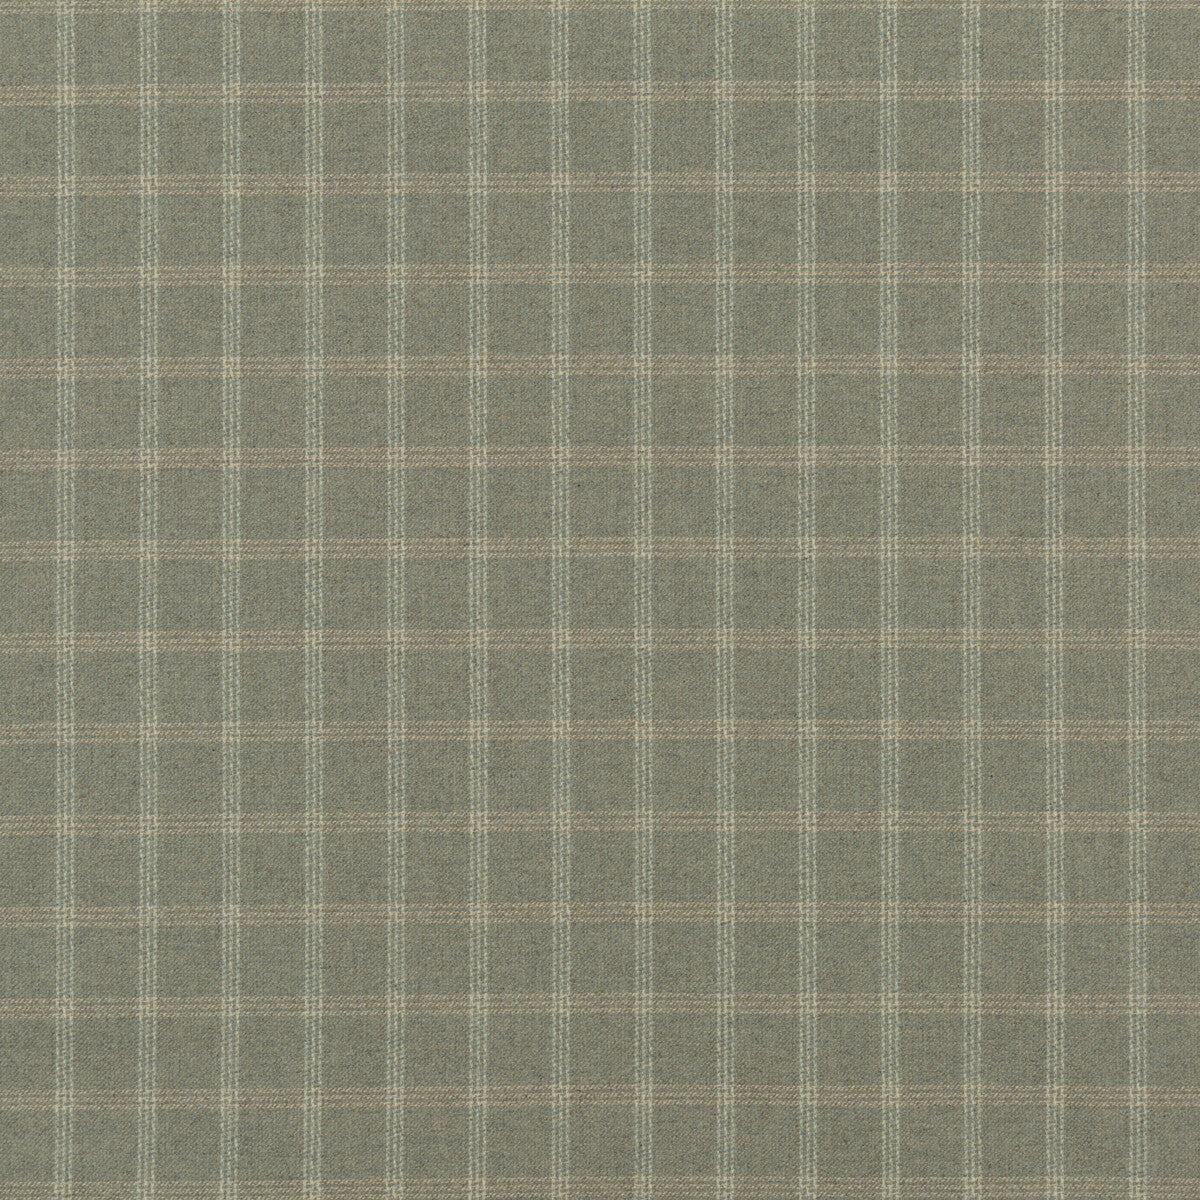 Bute fabric in soft lovat color - pattern FD749.R106.0 - by Mulberry in the Festival collection